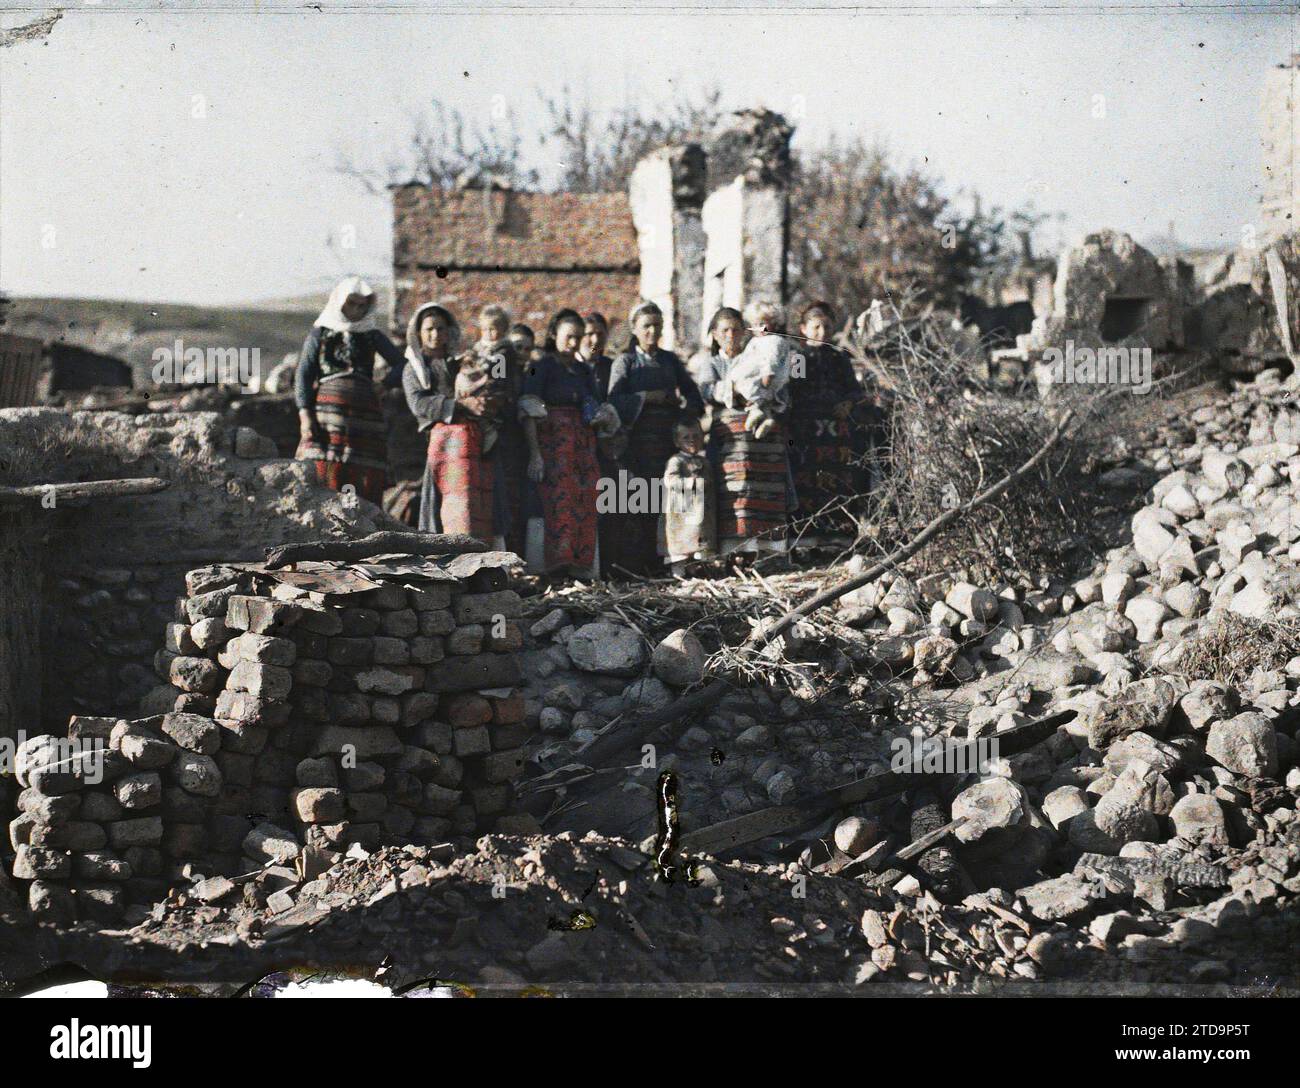 Mandjovo', surroundings of Melnik, Bulgaria Group of women and children among the rubble of the war-ravaged village, Human beings, Political life, Clothing, HD, Woman, Foreign war, Costume, Balkan Wars, exists in high definition, Group portrait, Mandjovo, Bulgarian Village Ruins, Mandjovo [environs de Melnik], 20/09/1913 - 20/09/1913, Passet, Stéphane, photographer, 1913 - Balkans, Greece, Bulgarie - Stéphane Passet - (30 August-21 October), Autochrome, photo, Glass, Autochrome, photo, Positive, Horizontal, Size 9 x 12 cm Stock Photo